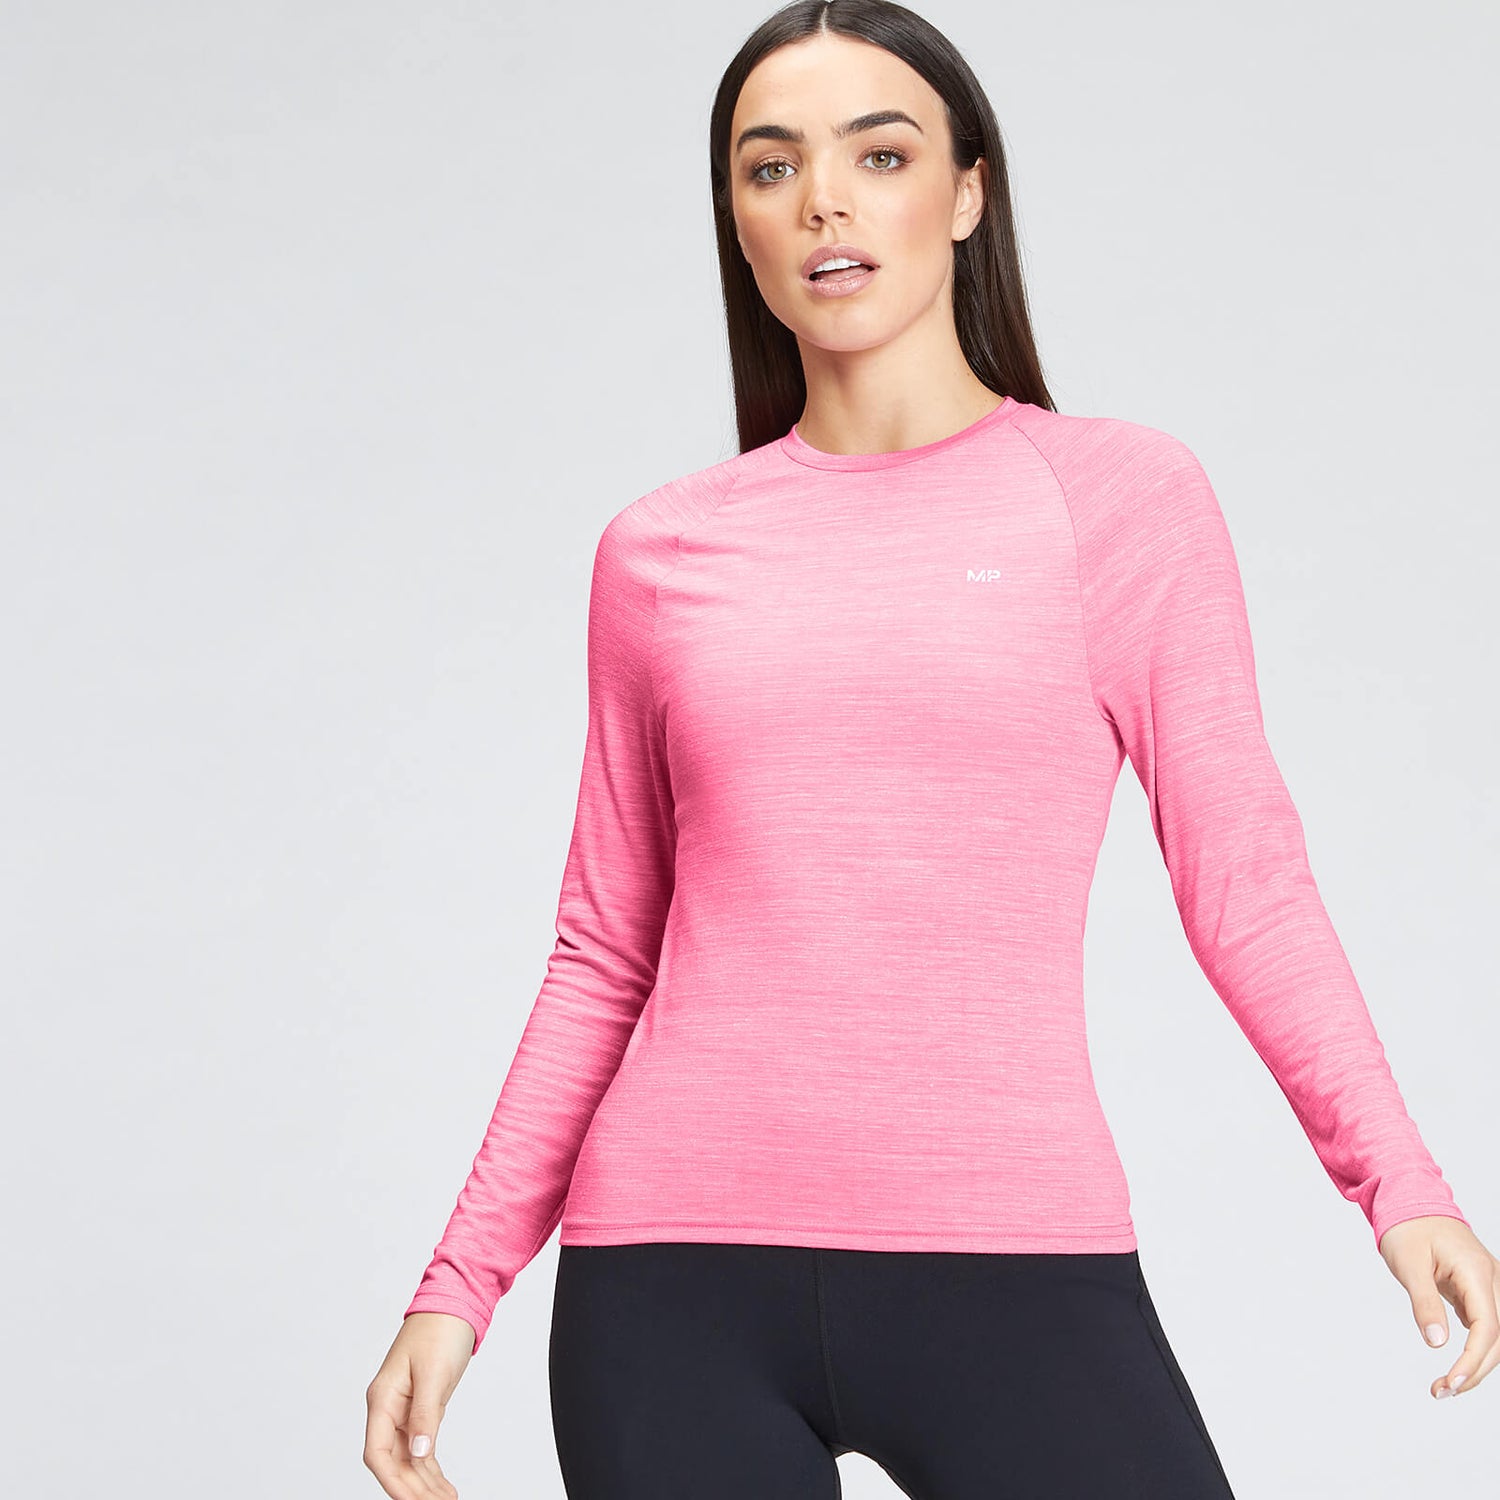 MP Women's Performance Long Sleeve Training T-Shirt - Candyfloss Marl with White Fleck - S